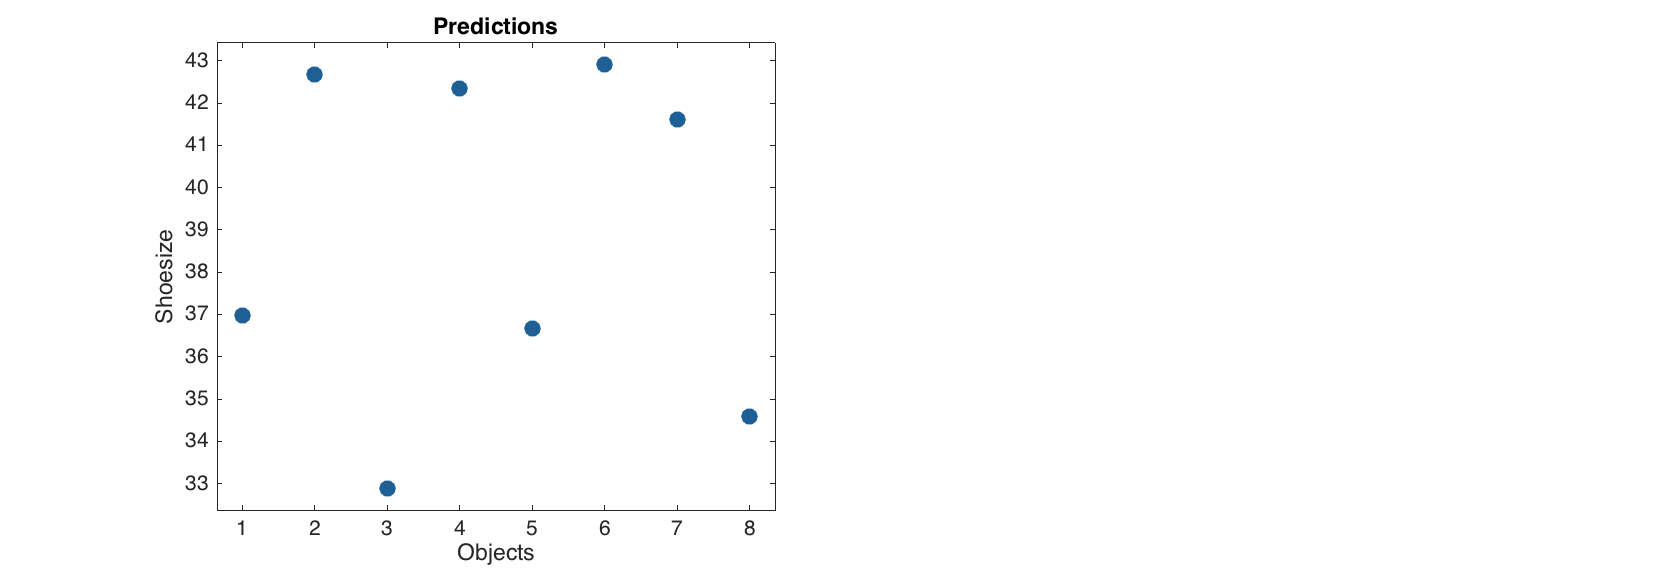 Predictions plot for results without reference values